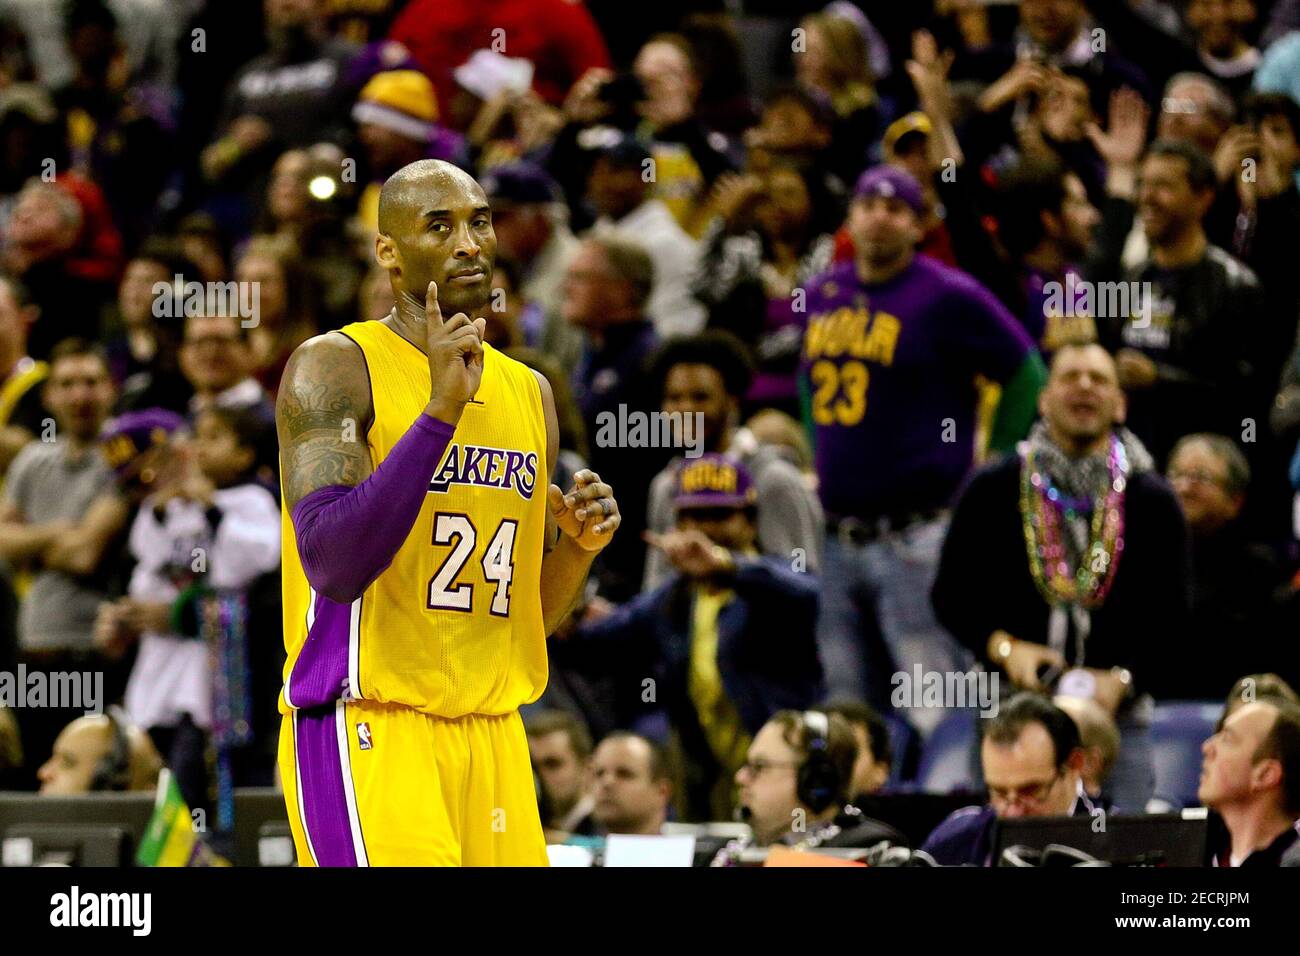 Feb 4, 2016; New Orleans, LA, USA; Los Angeles Lakers forward Kobe Bryant (24) gestures after scoring against the New Orleans Pelicans during the fourth quarter of a game at the Smoothie King Center. The Lakers defeated the Pelicans 99-96. Mandatory Credit: Derick E. Hingle-USA TODAY Sports  / Reuters  Picture Supplied by Action Images   (TAGS: Sport Basketball NBA) *** Local Caption *** 2016-02-05T054135Z 877812455 NOCID RTRMADP 3 NBA-LOS-ANGELES-LAKERS-AT-NEW-ORLEANS-PELICANS.JPG Stock Photo